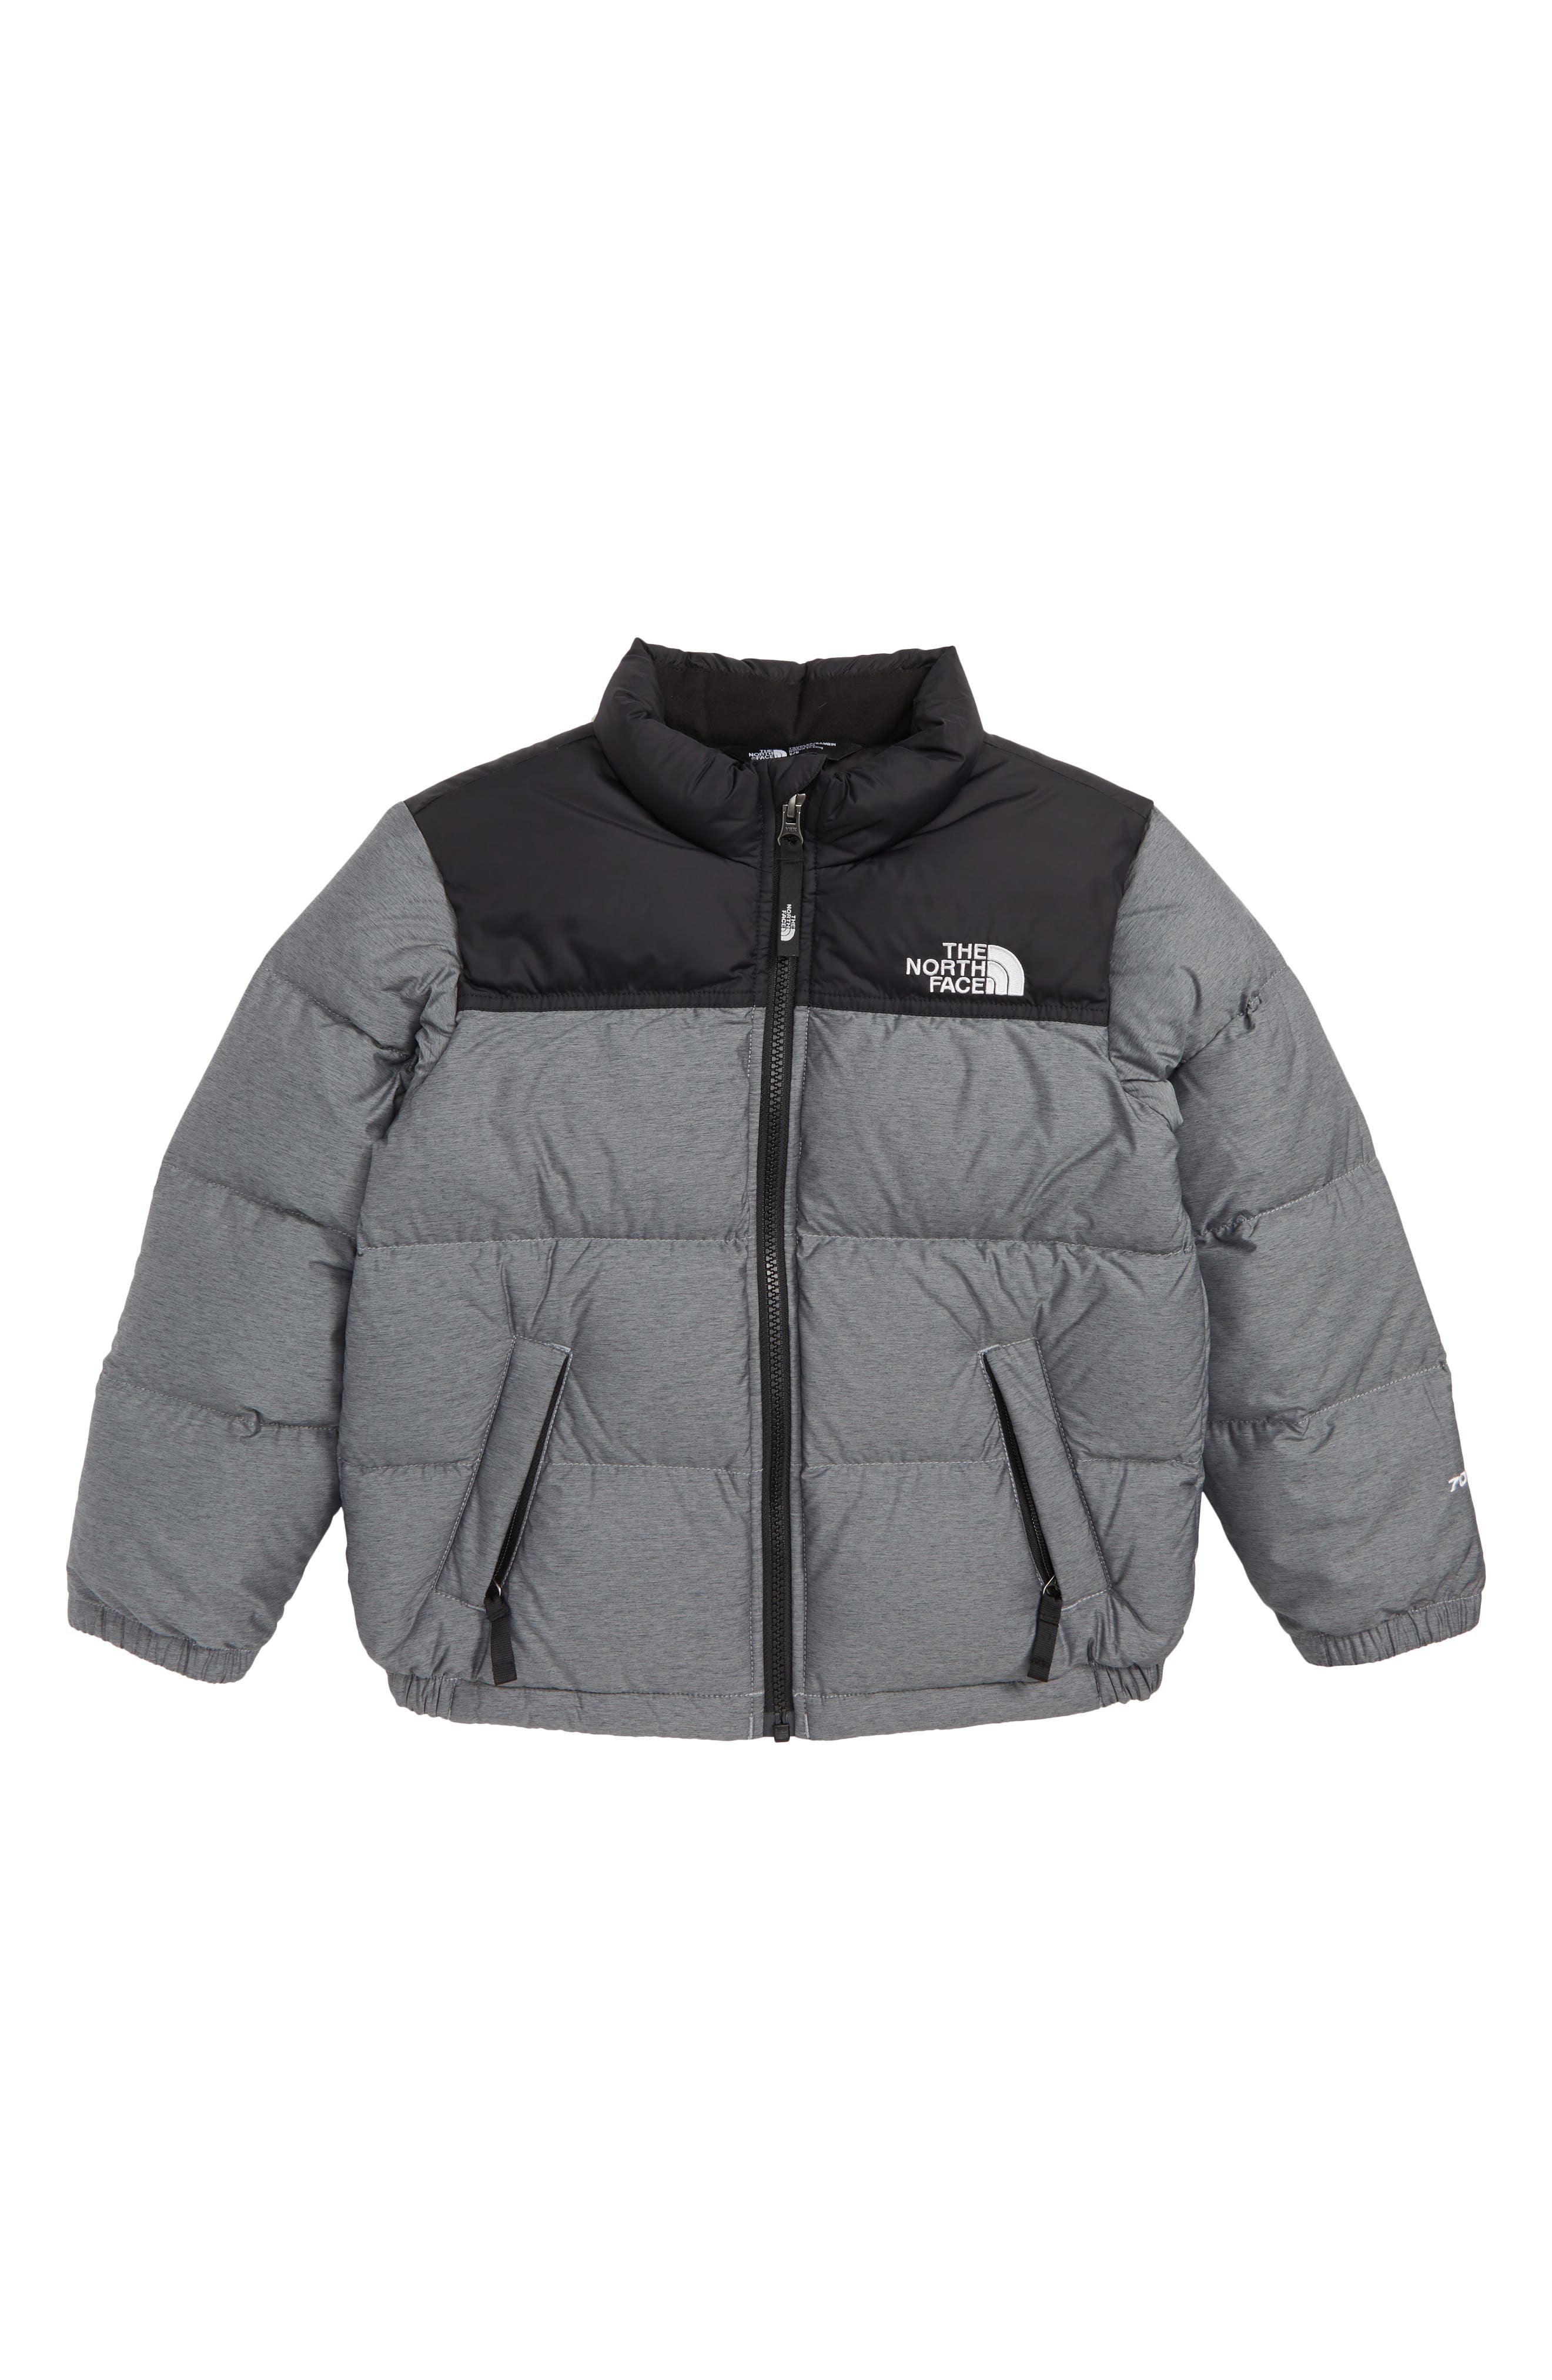 the north face 700 coat